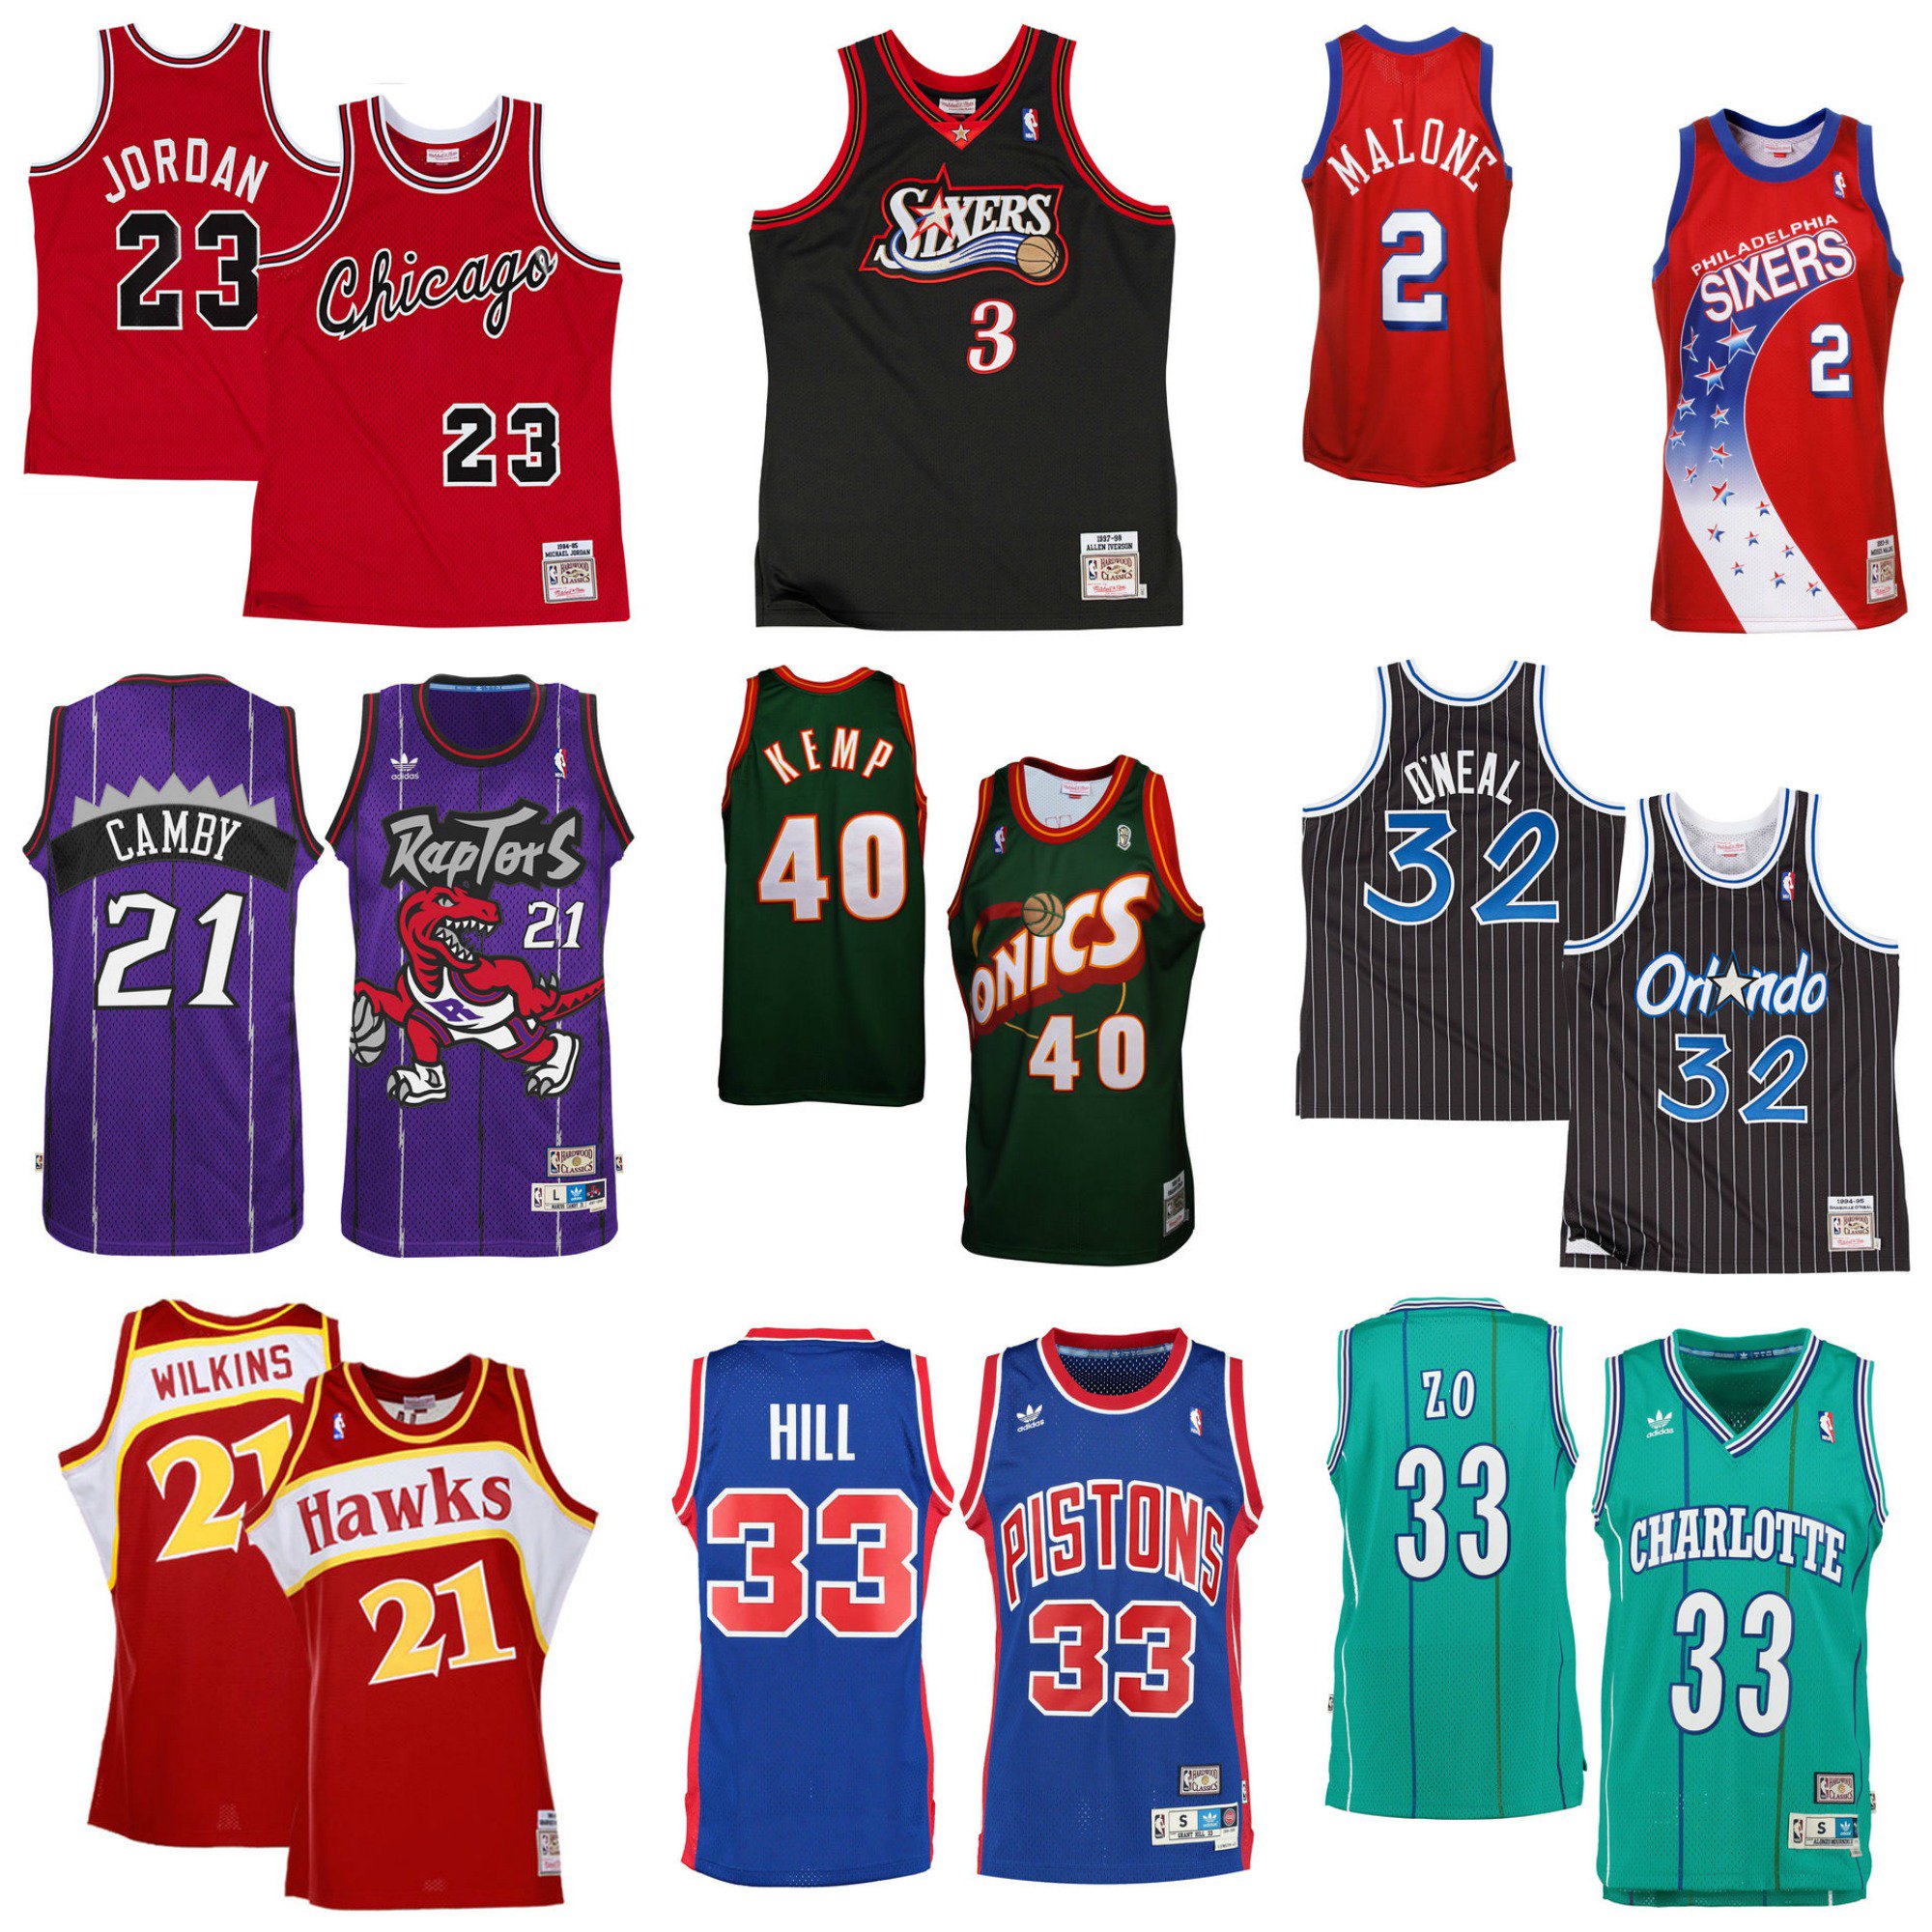 What's the best NBA jersey of all time?